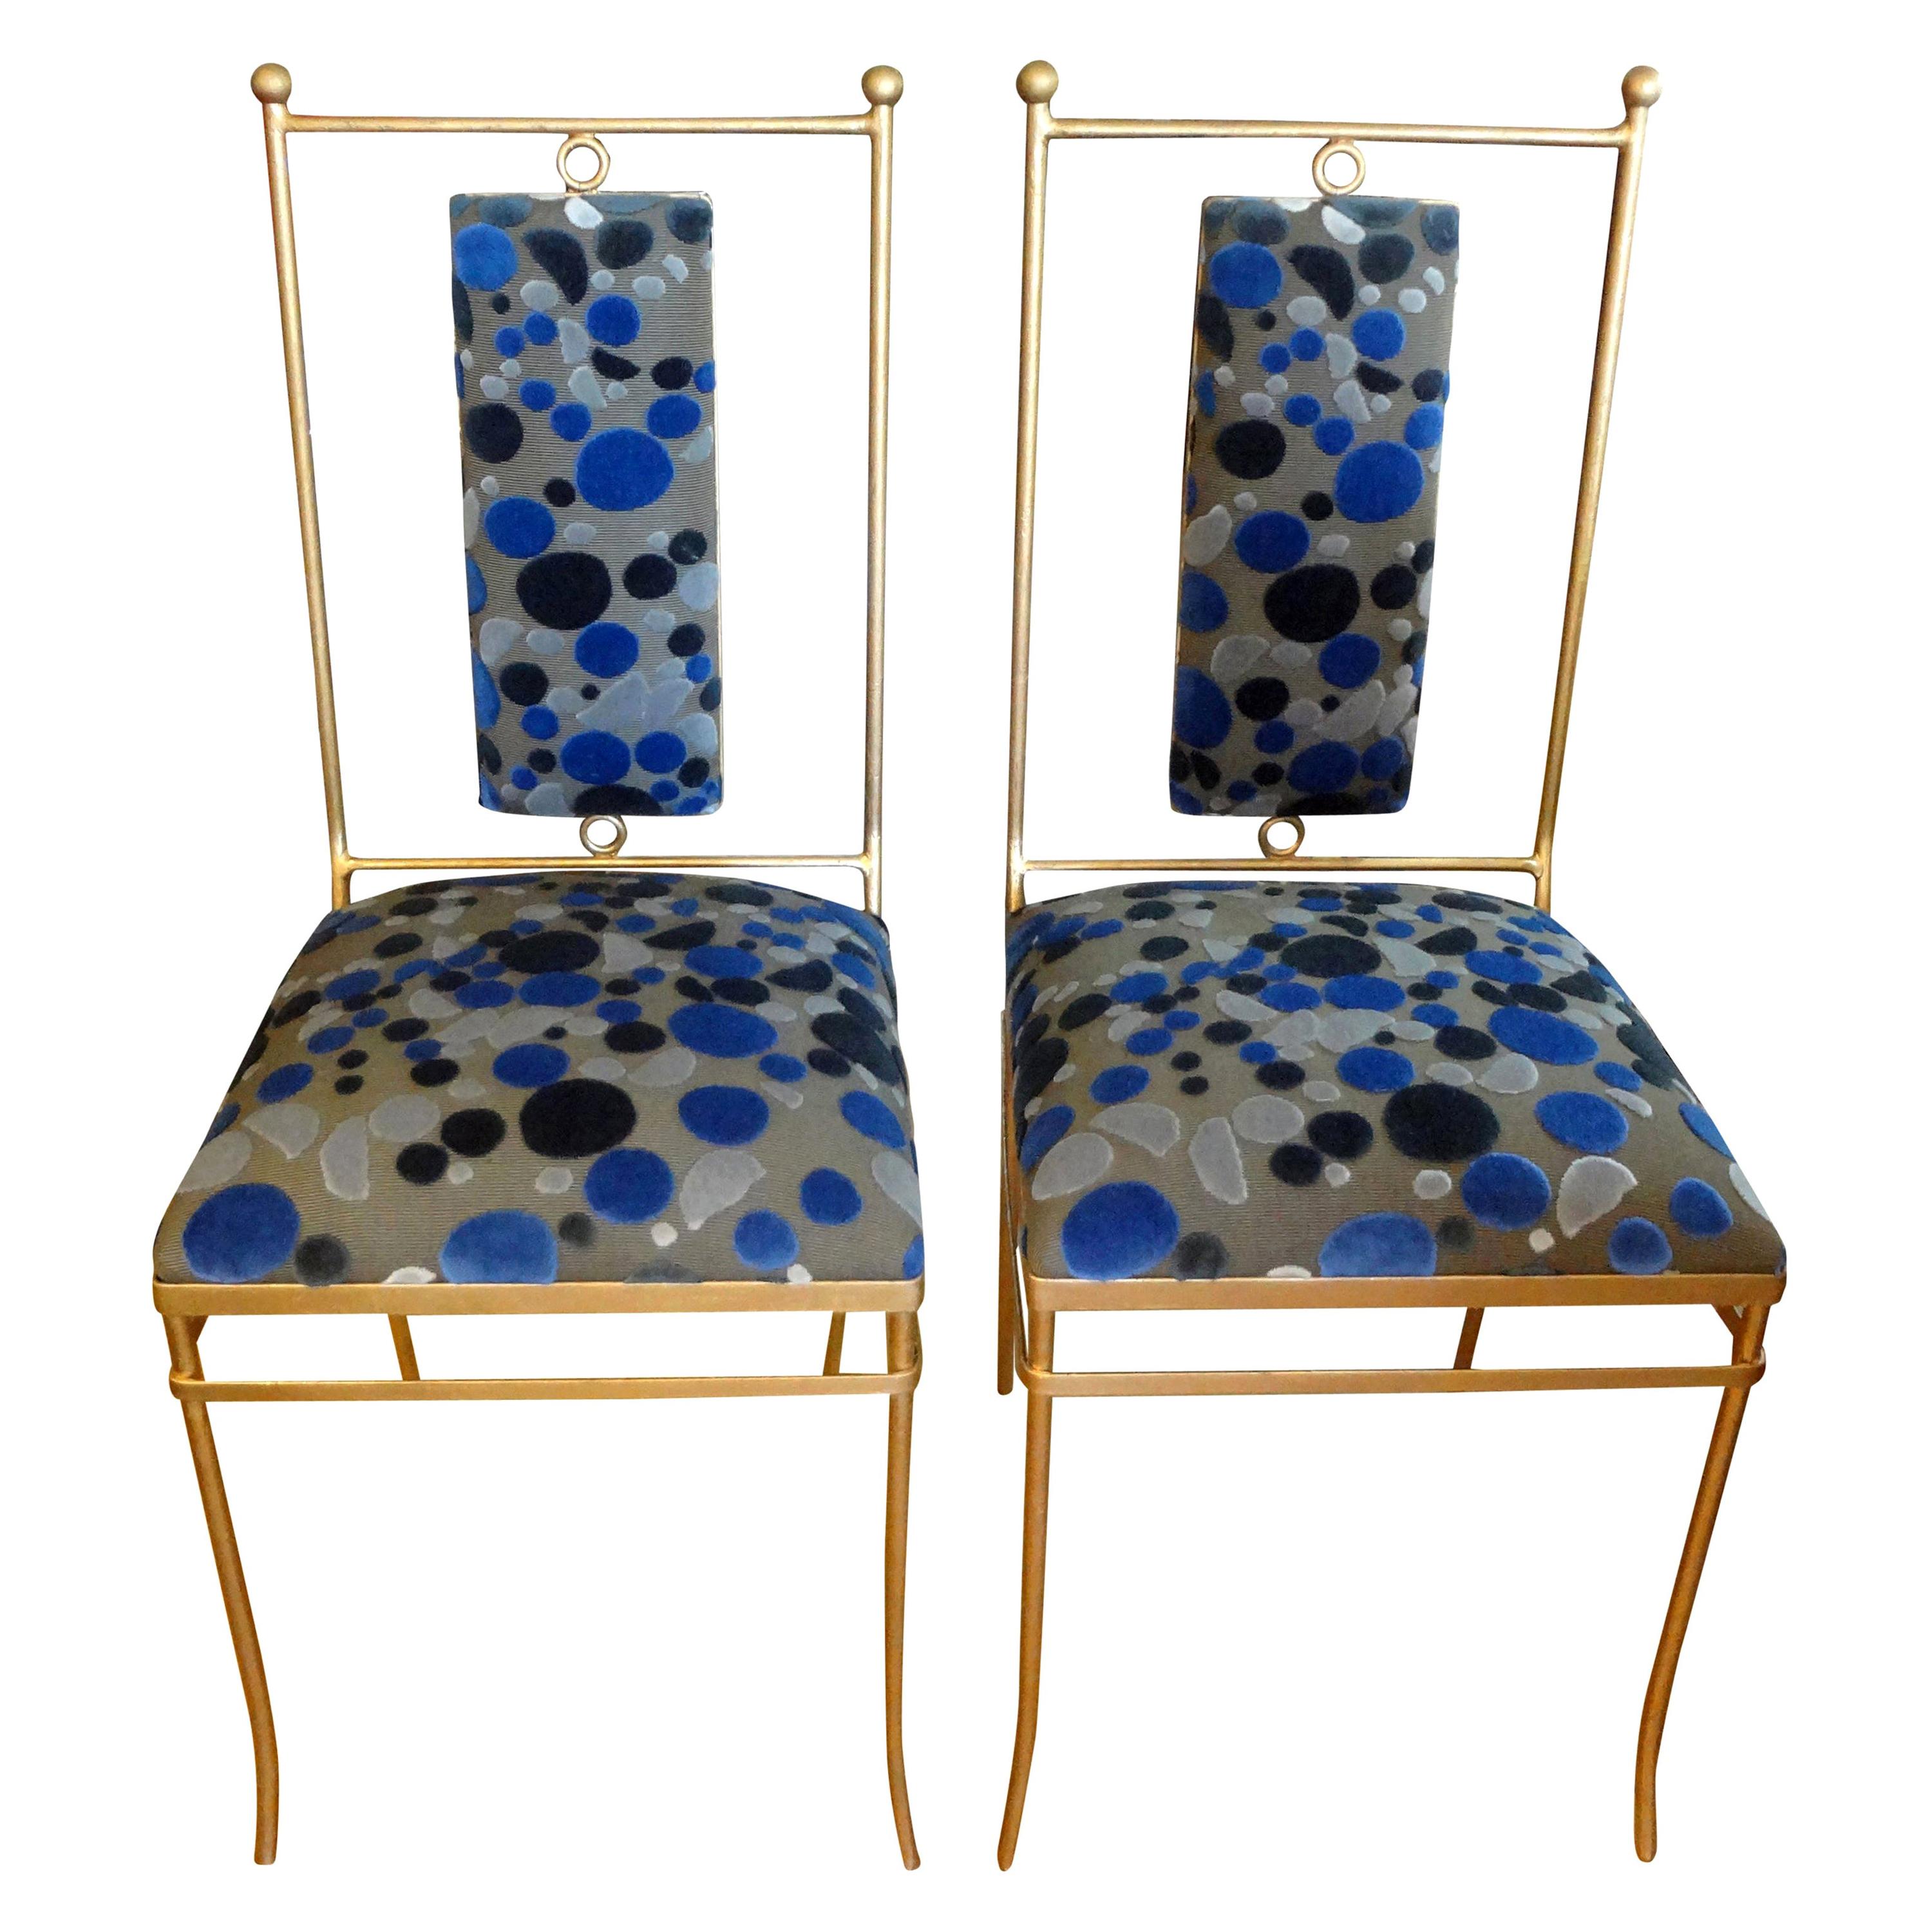 Pair of Italian Neoclassical Style Gilt Iron Chairs